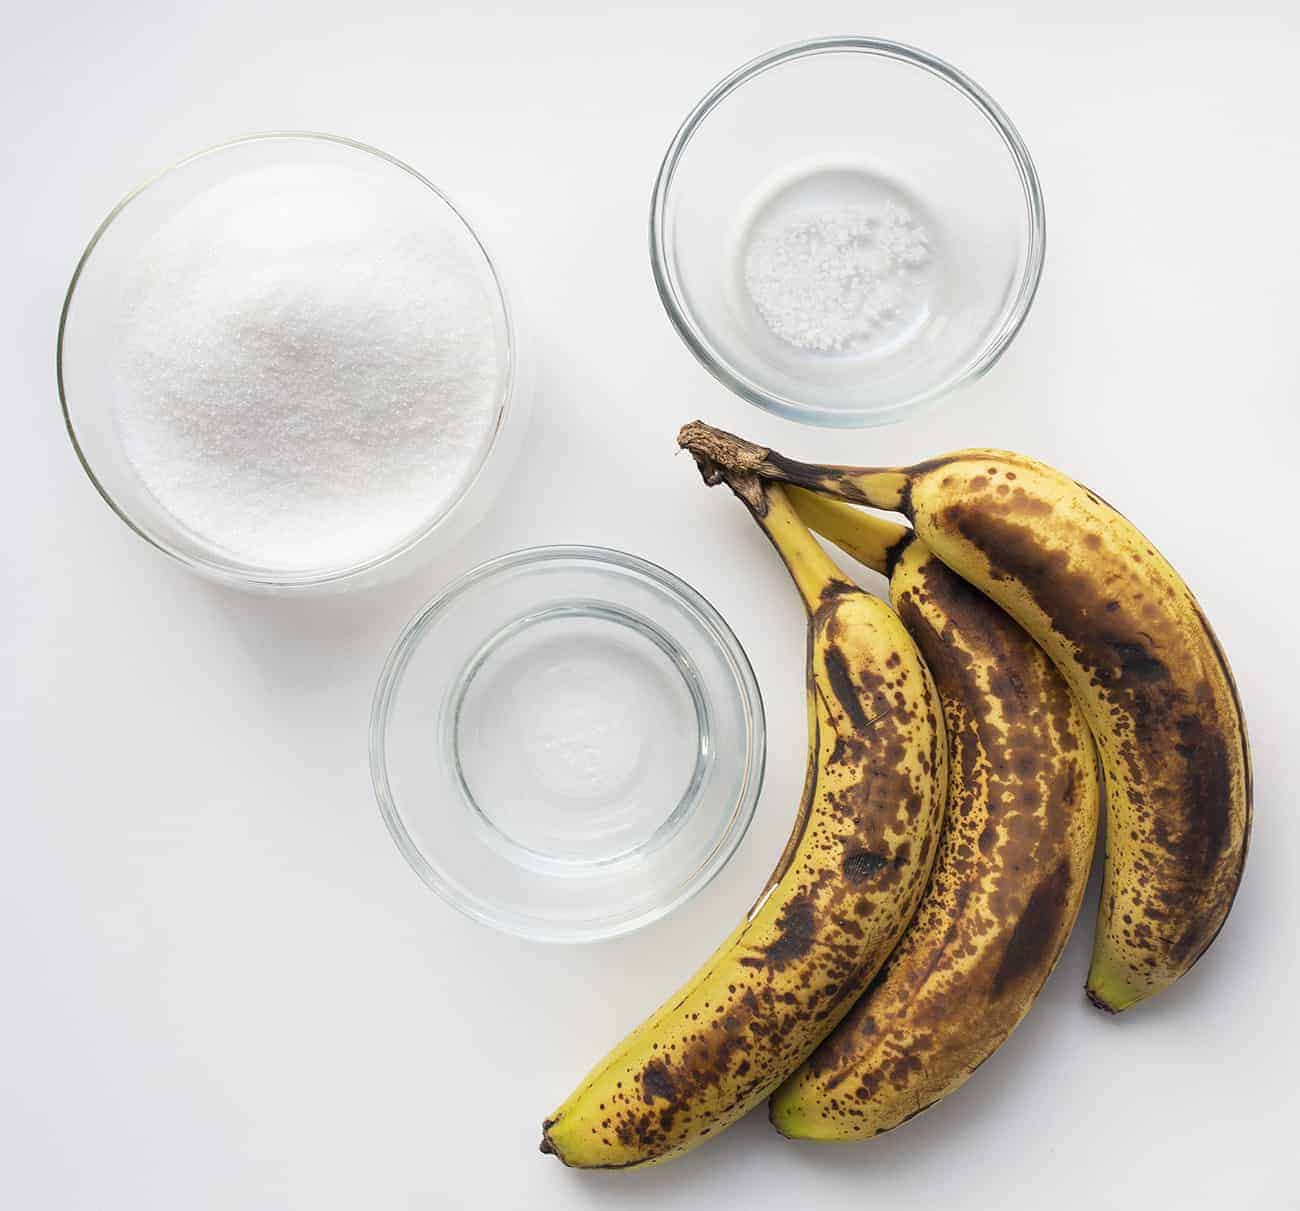 Ingredients for Banana Simple Syrup